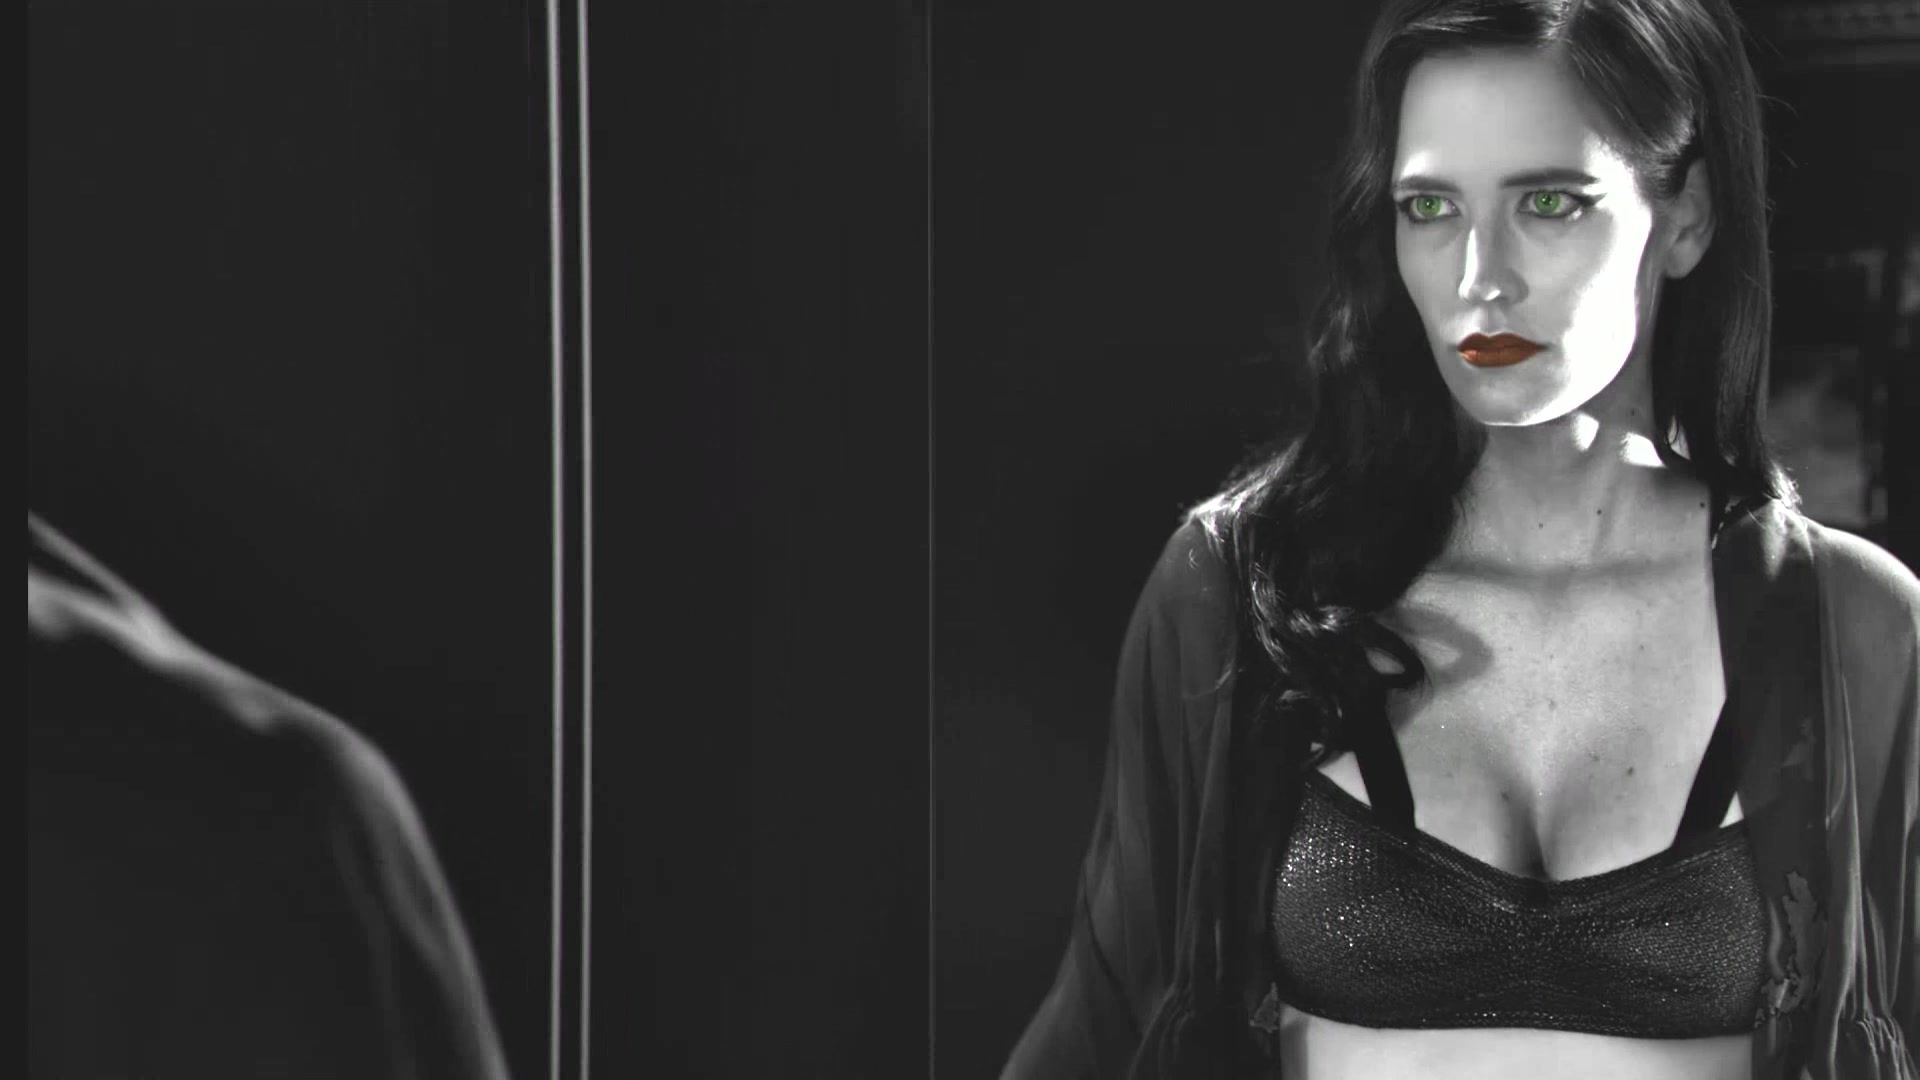 Monstercock Eva Green - Sin City 2 - A Dame To Kill For (2014) Full HD 1080 BR (Sex, Nude, FF) Anal Fuck - 2